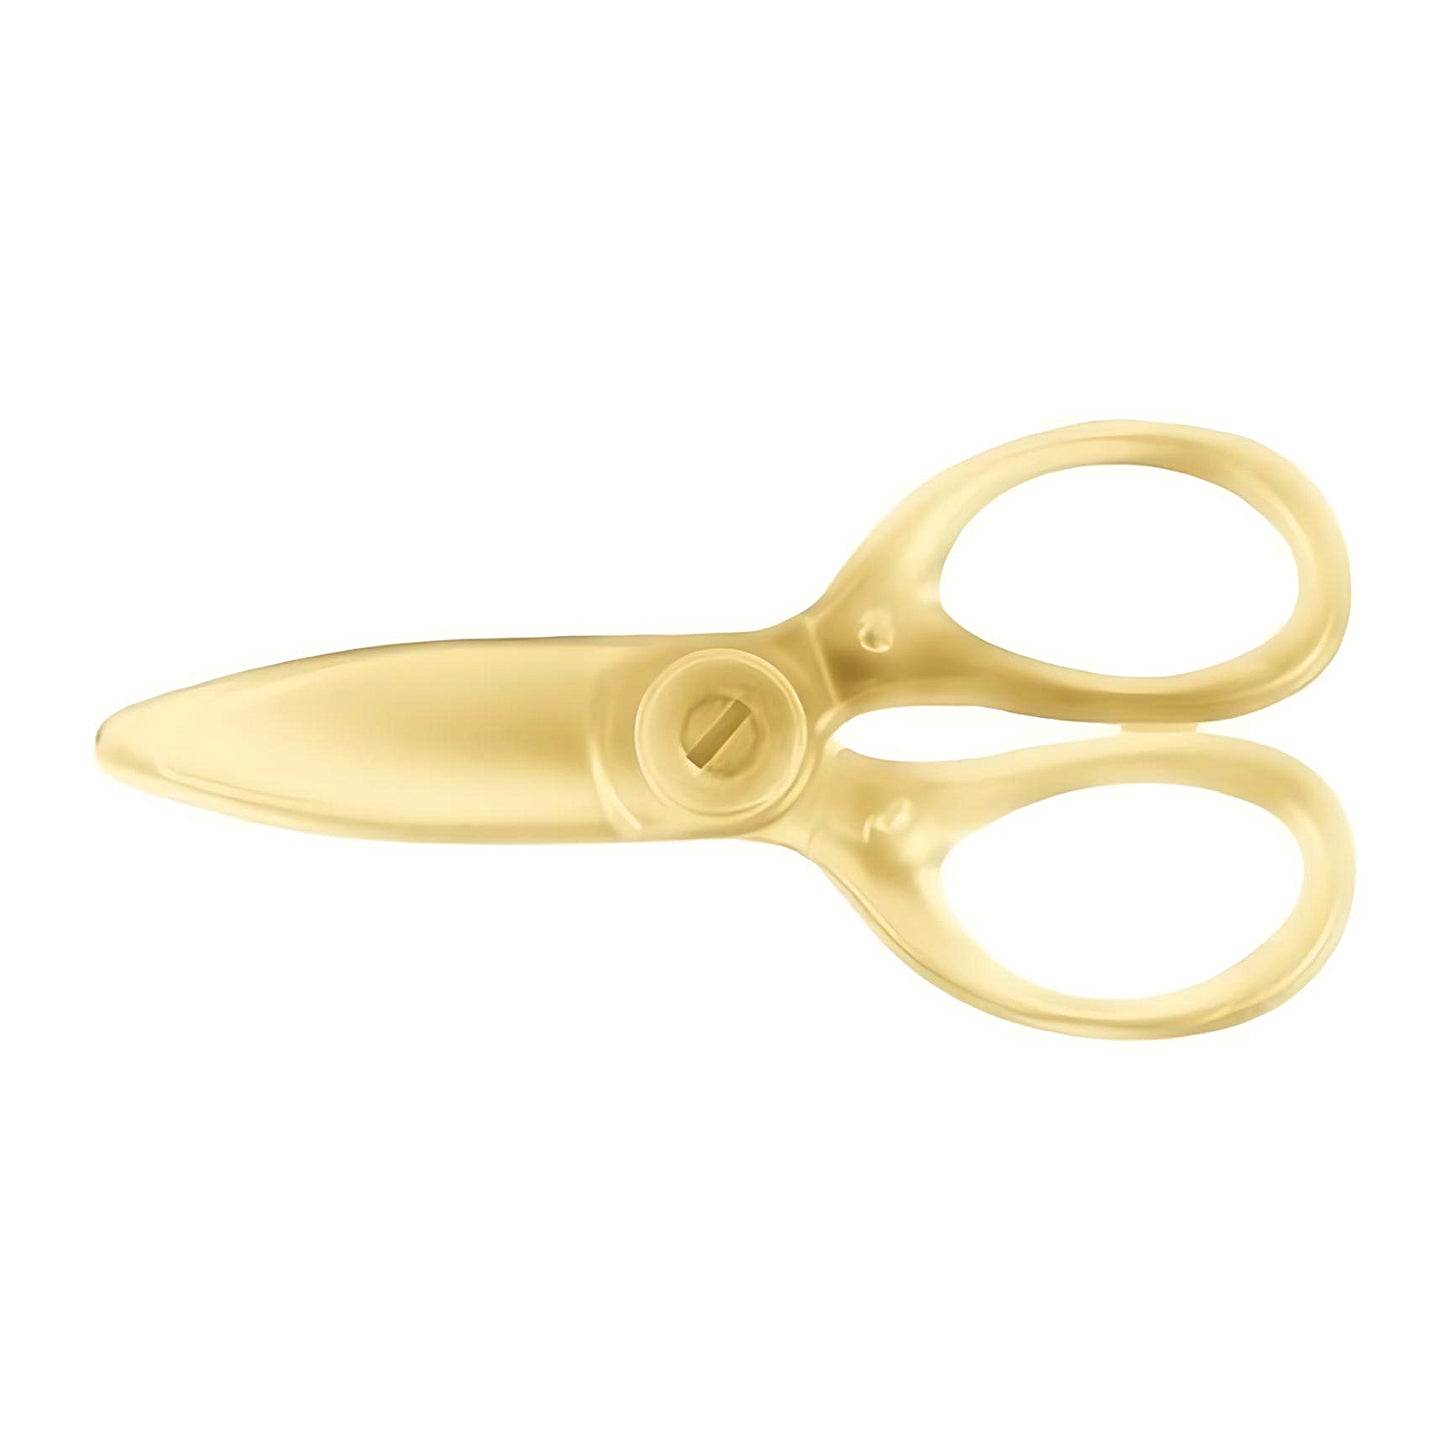 Kokuyo plastic scissors in yellow color on a white background